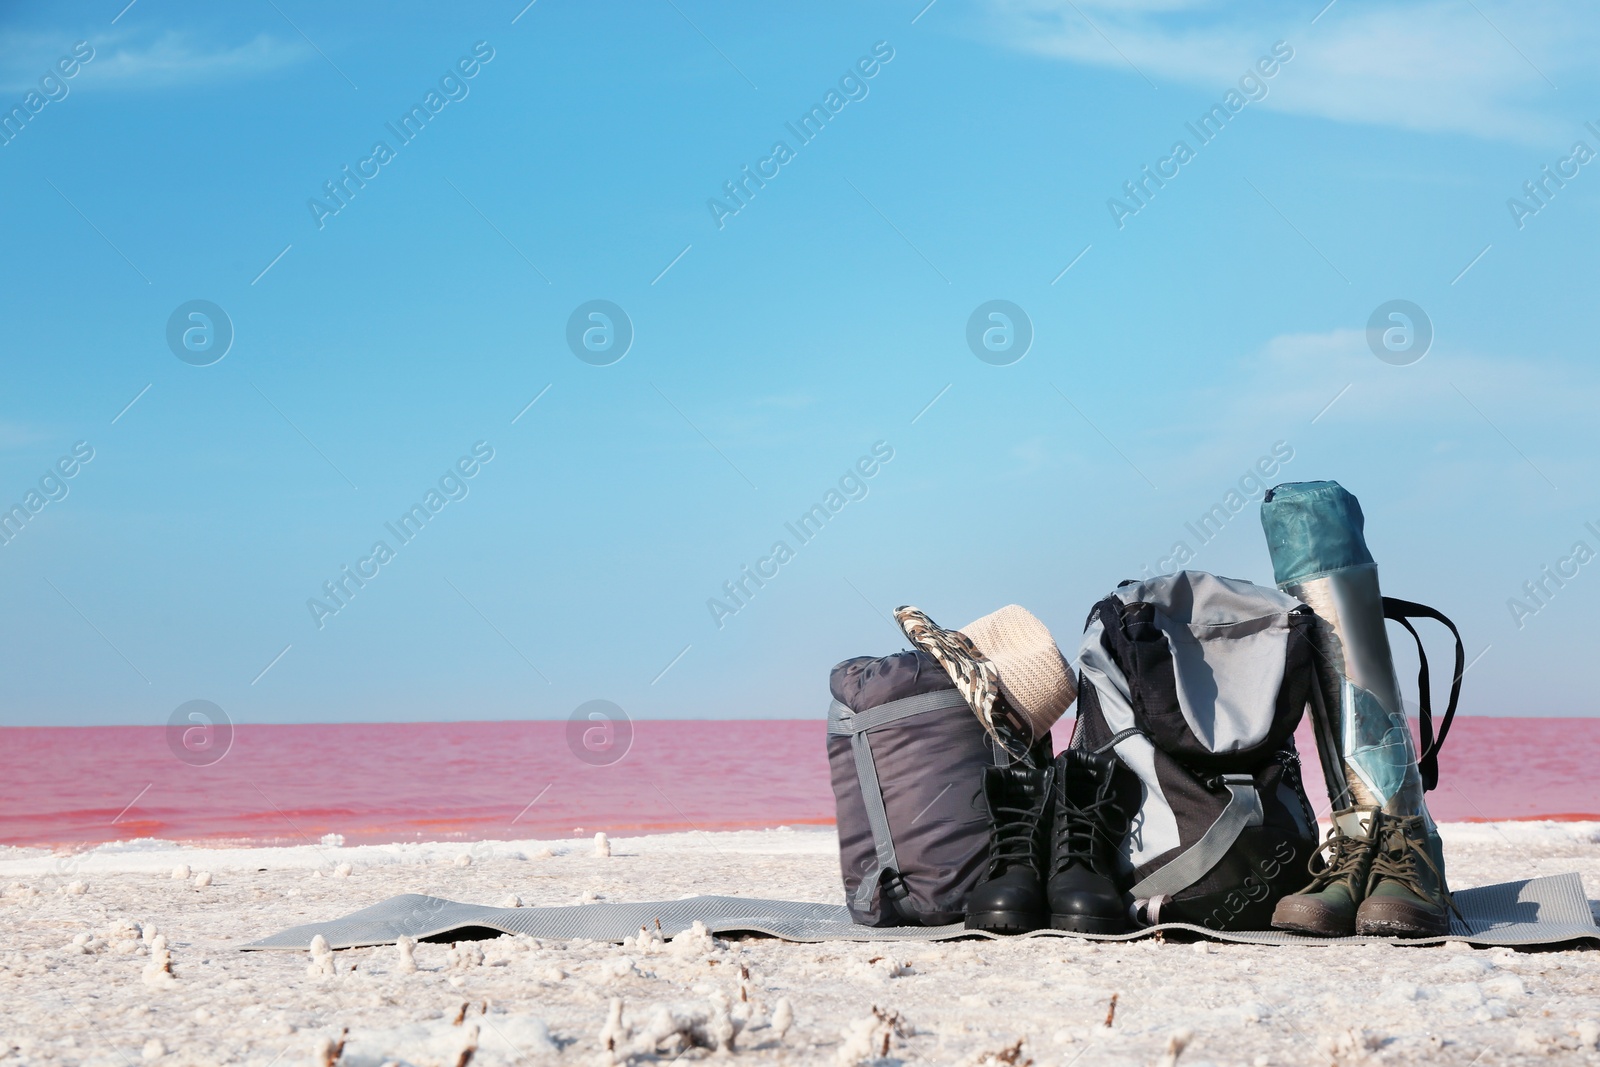 Photo of Set of camping equipment with sleeping bag on coast of pink lake